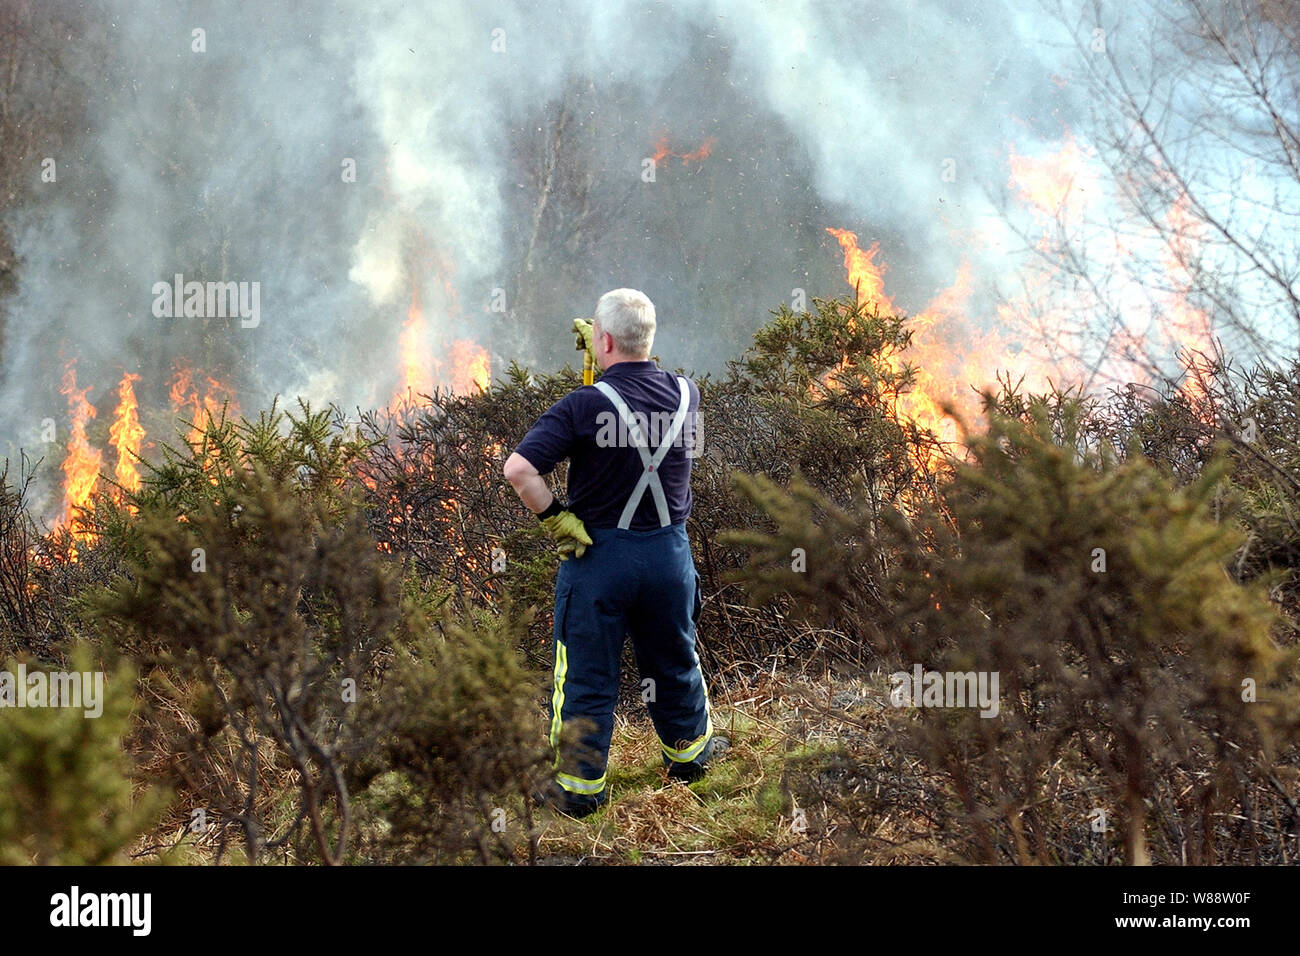 Fire Service called out to tackle a wild fire on the Malvern Hills after a controlled blaze by Malvern Hills Conservators got out of control. Worcestershire Beacon, Malvern Hills. A firefighter watches at the height of the blaze. Stock Photo